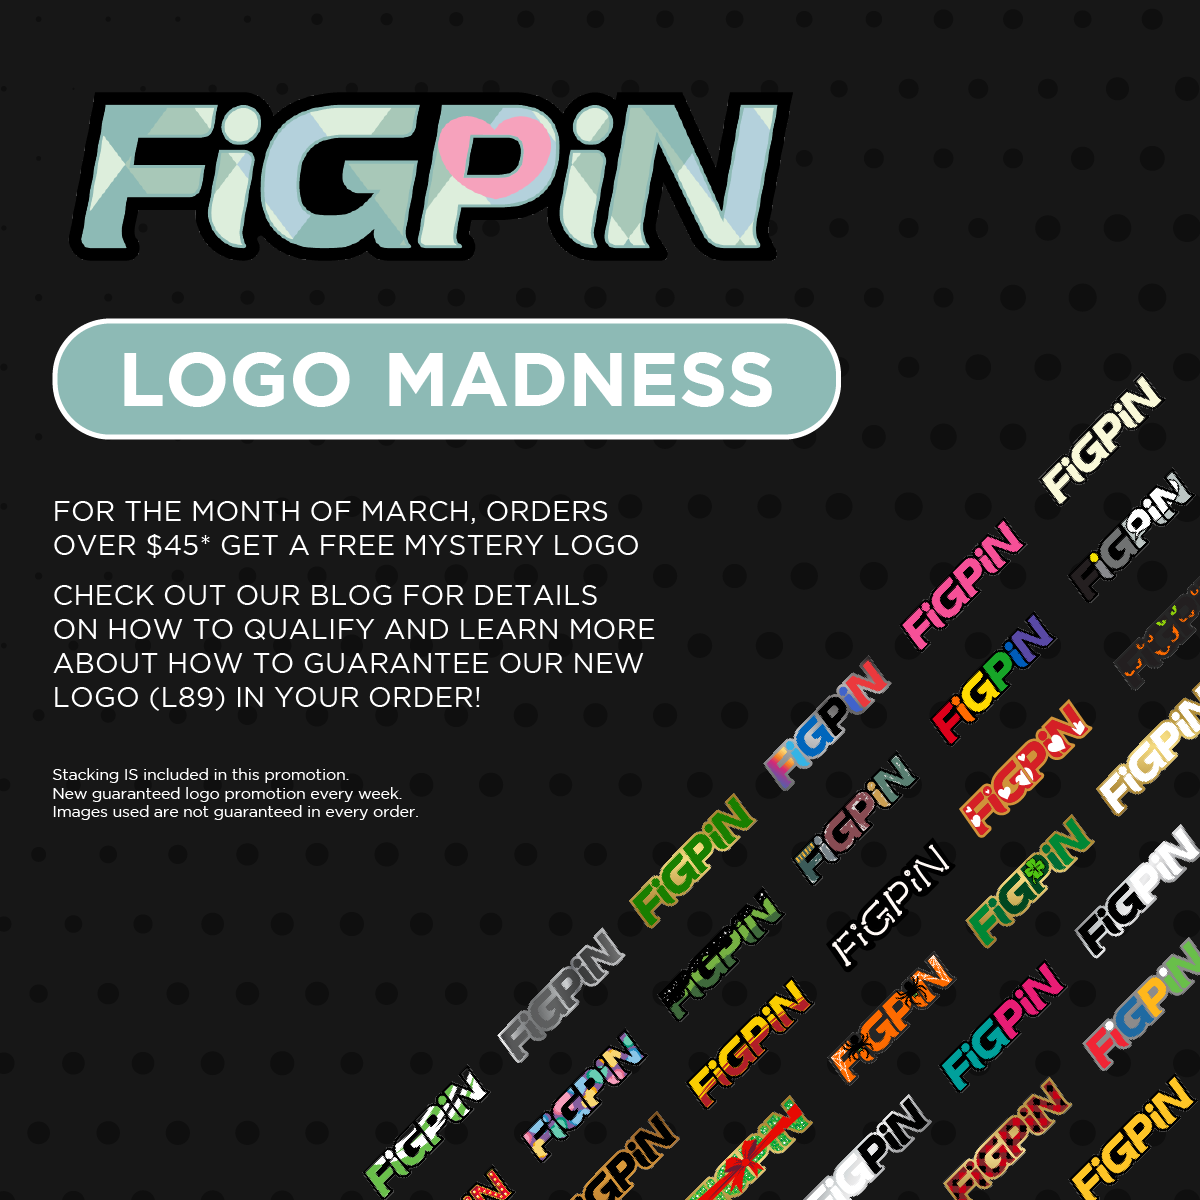 WEEK 03 OF FIGPIN LOGO MADNESS FEATURING L89